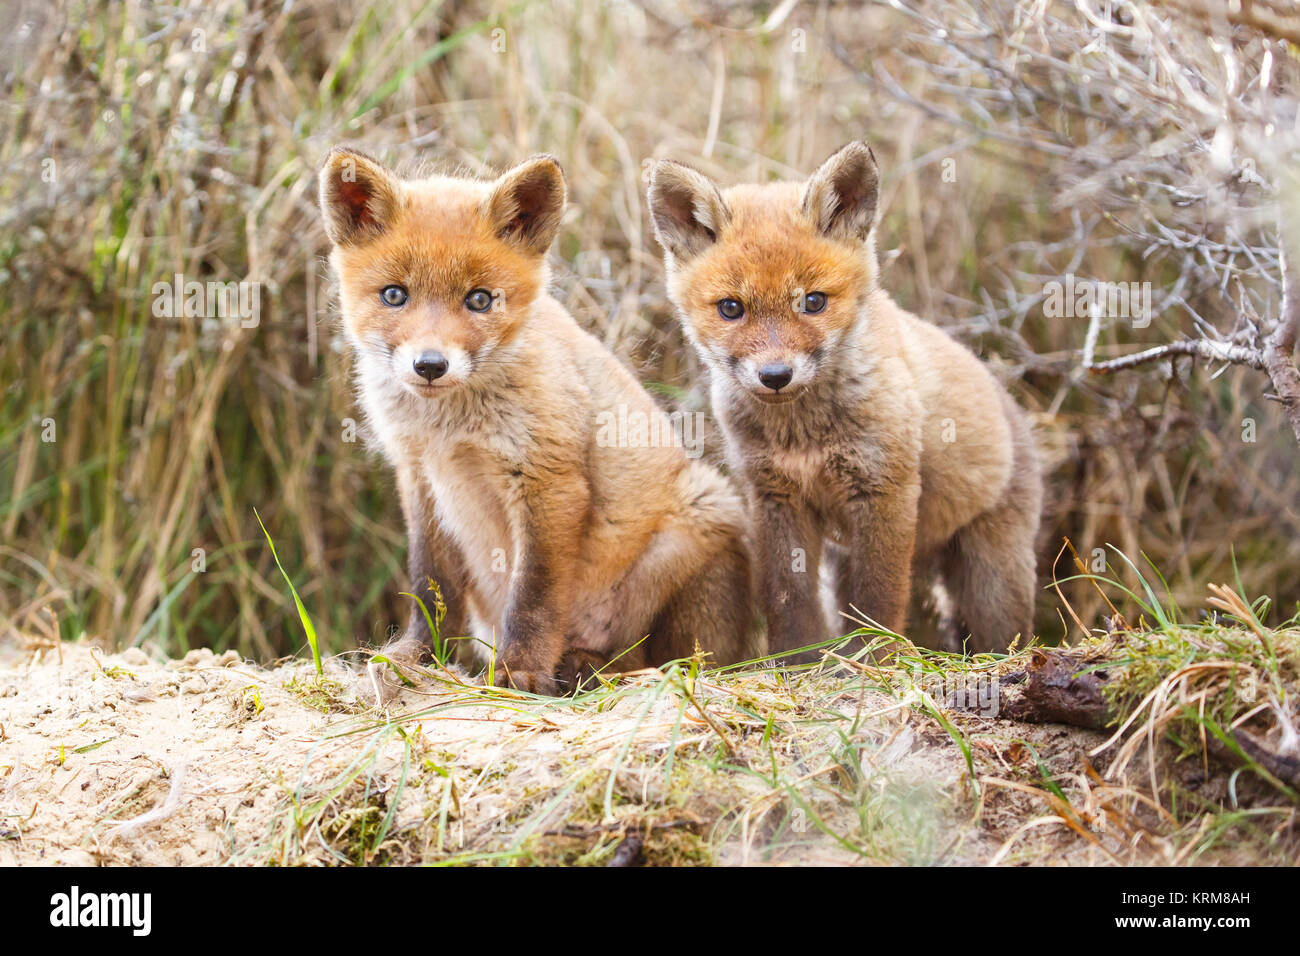 Red Fox cubs Stockfoto